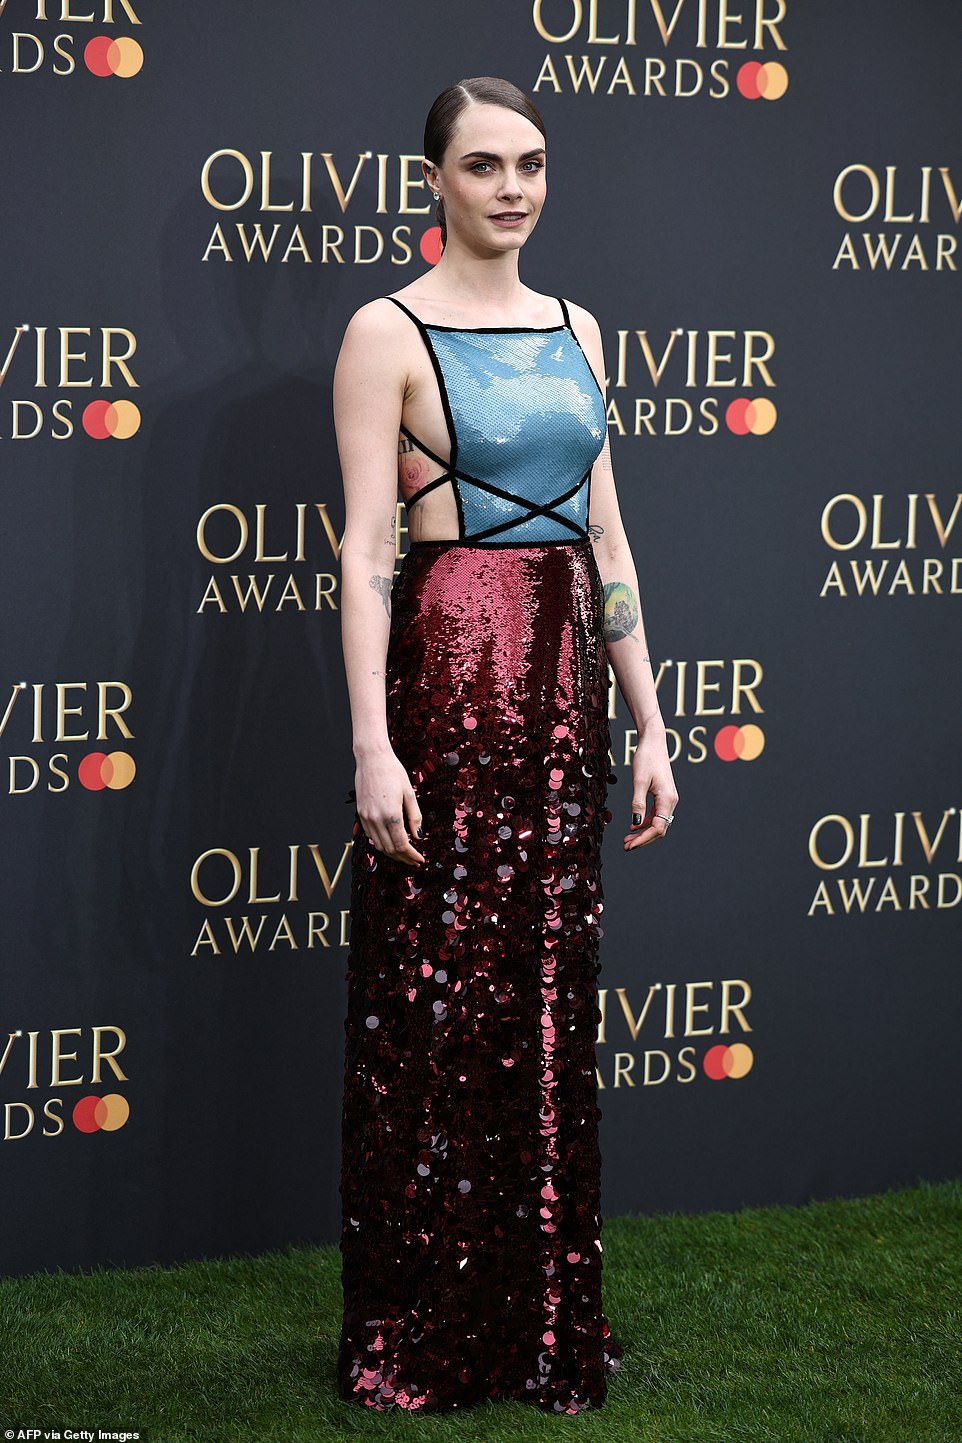 Cara, 31, showed off plenty of skin as she arrived in a show-stopping backless gown, leaving many of her tattoos on full display